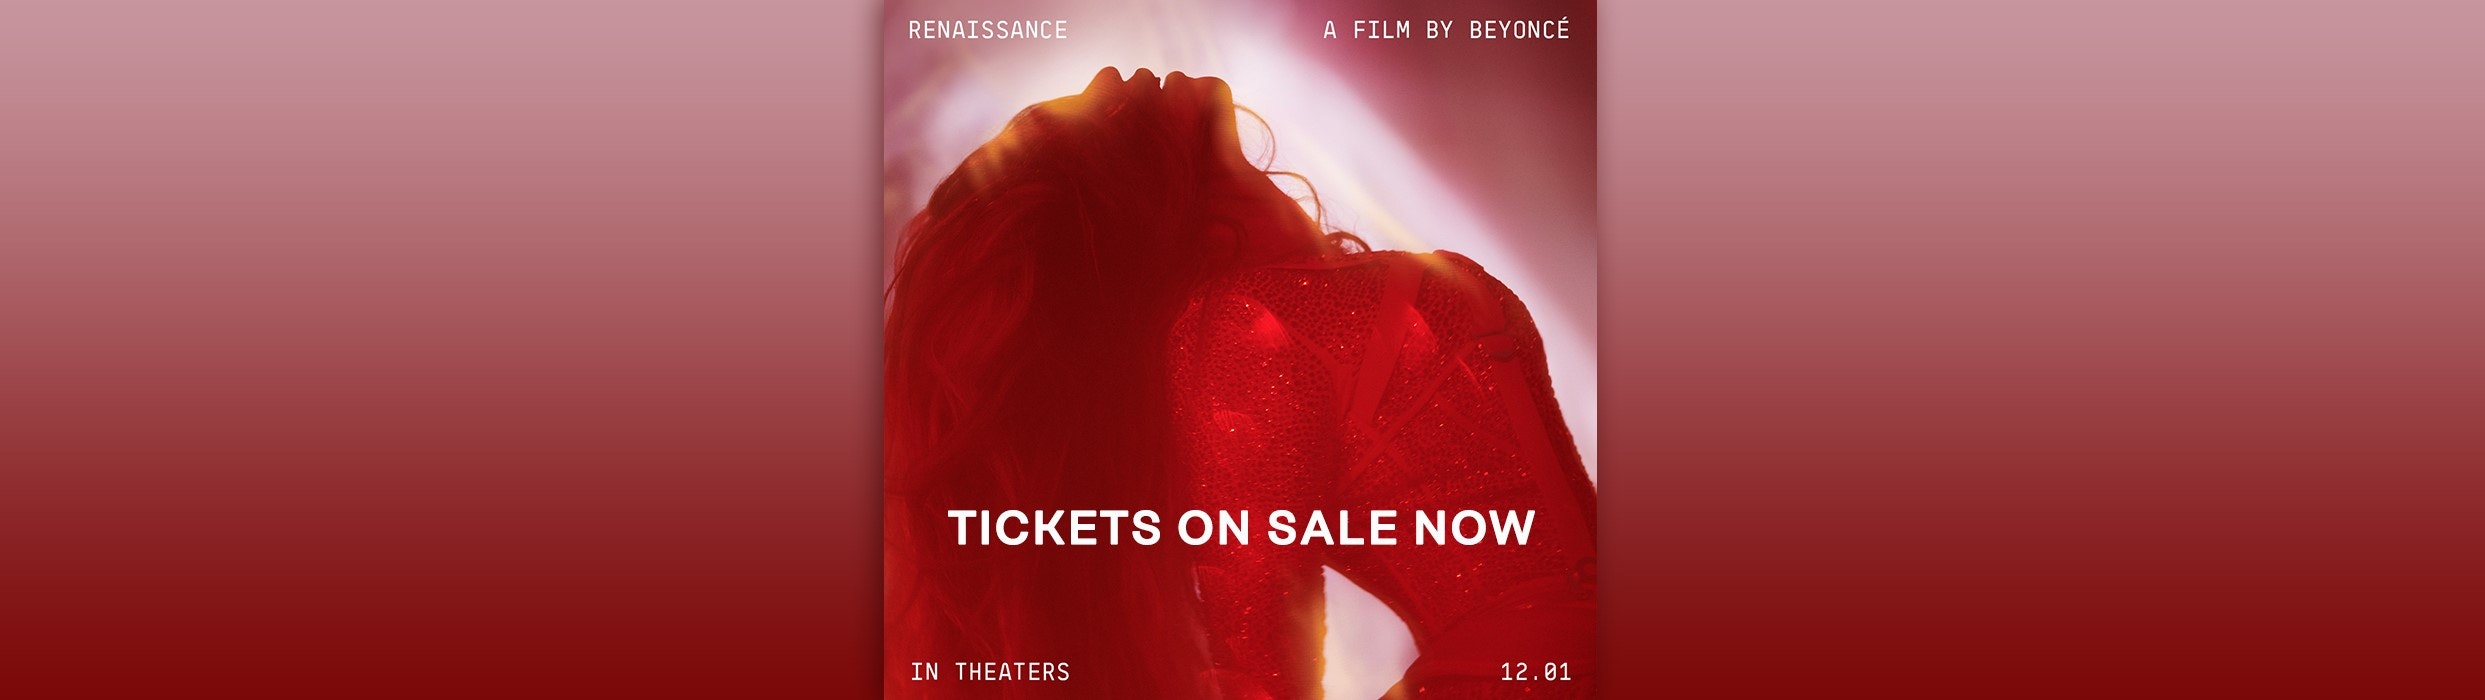 RENAISSANCE: A FILM BY BEYONCÉ  is coming to Harkins November 30, tickets are on sale now!